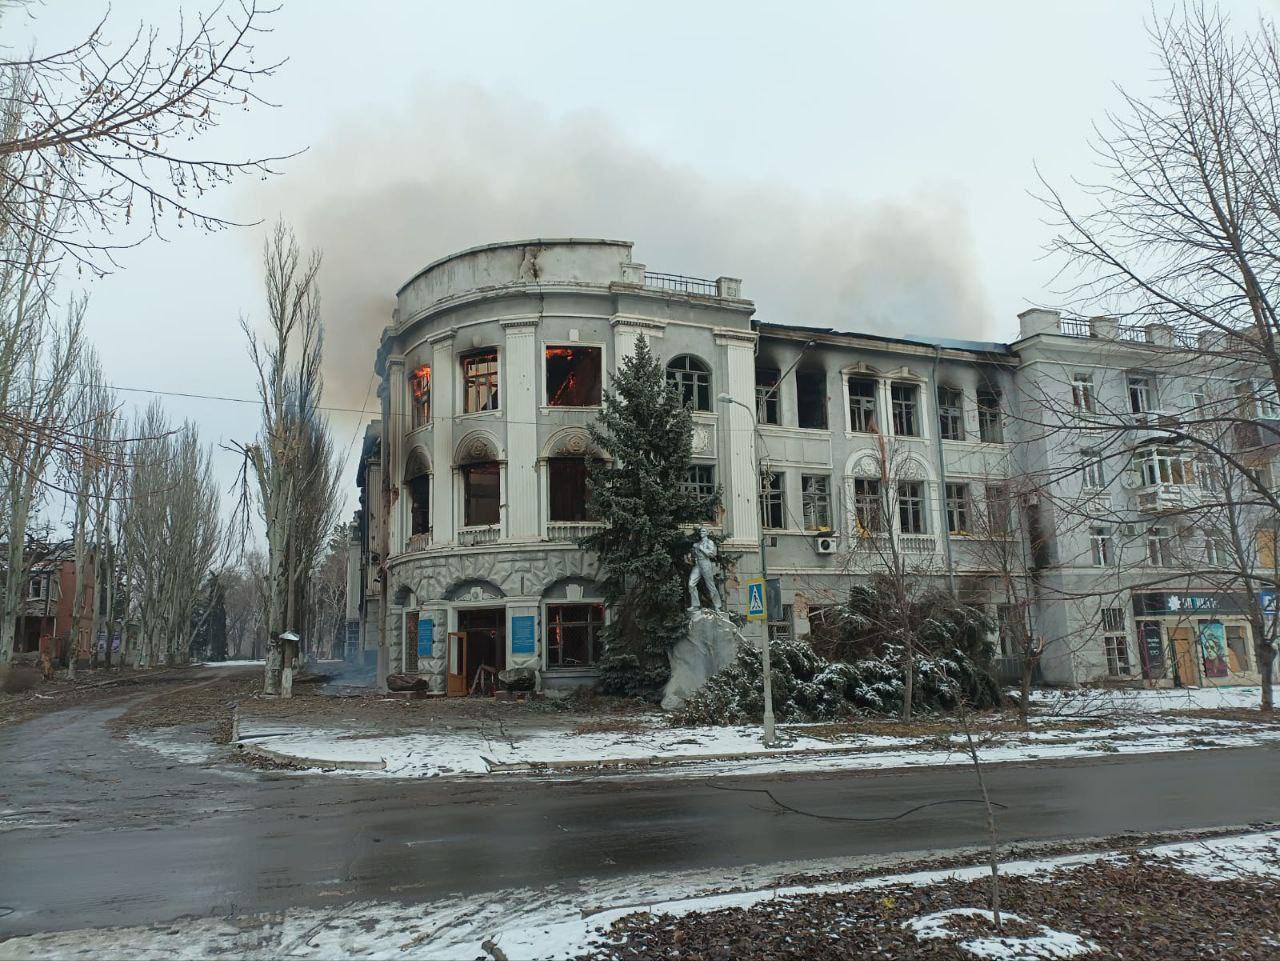 Russians killed 2 and wounded 14 inhabitants of Donetsk draw in in the future